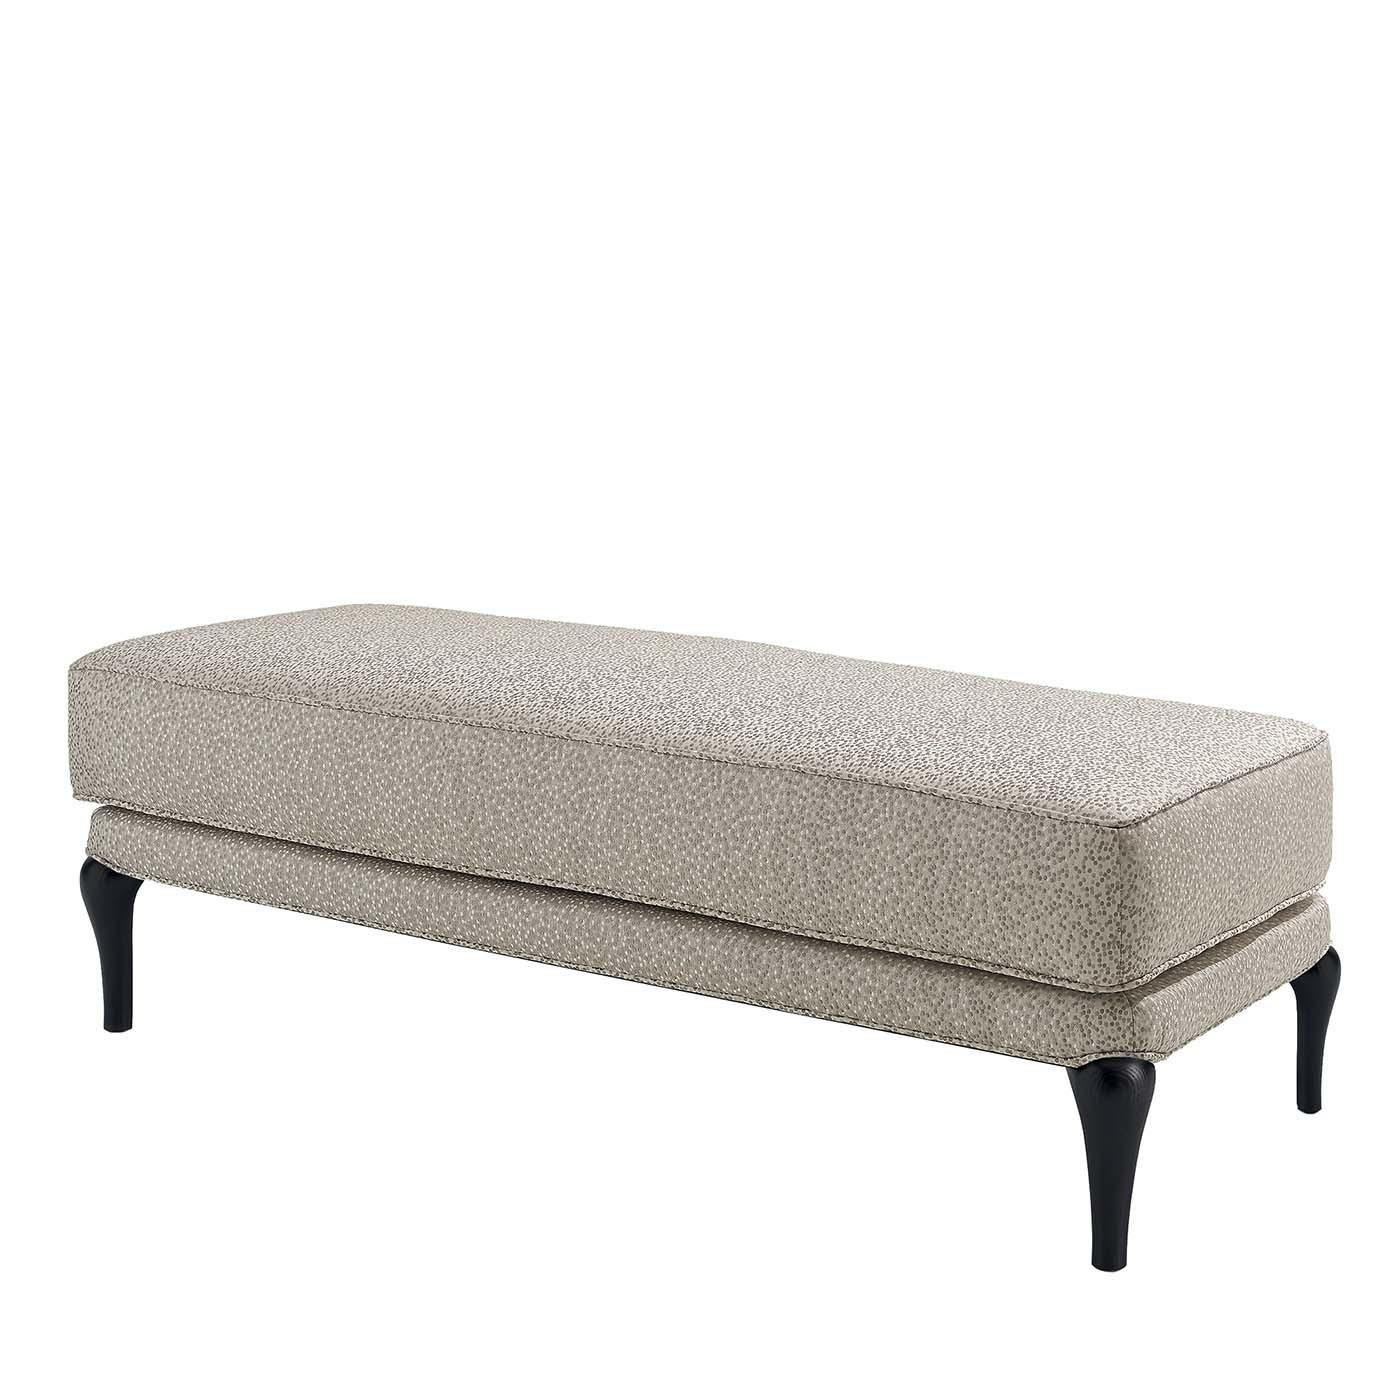 This elegant bench boasts a black-lacquered solid ash structure with short feet that supports a plain and rigorous silhouette upholstered of a cream-white melange fabric. A unique piece of delicate sophistication, this bench will find its perfect